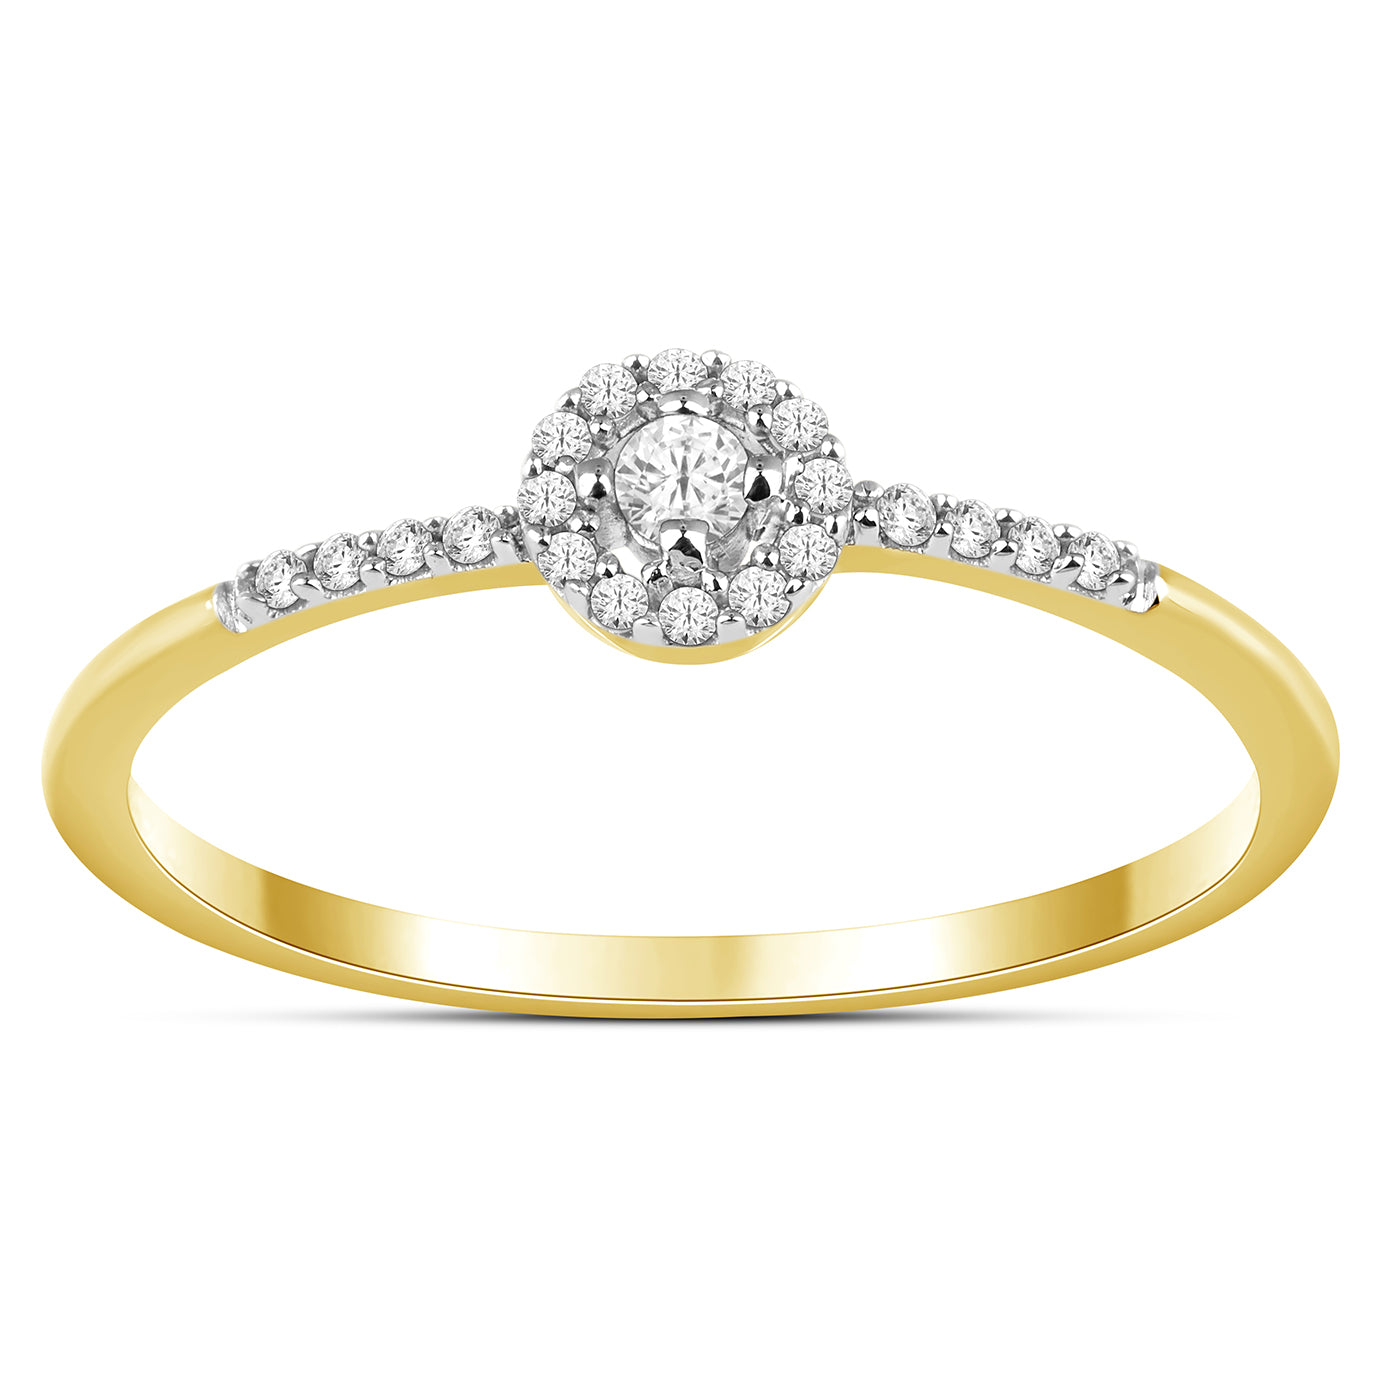 Round Engagement / Promise Ring With 0.10 Carat TW Of Diamonds In 10K Yellow Gold